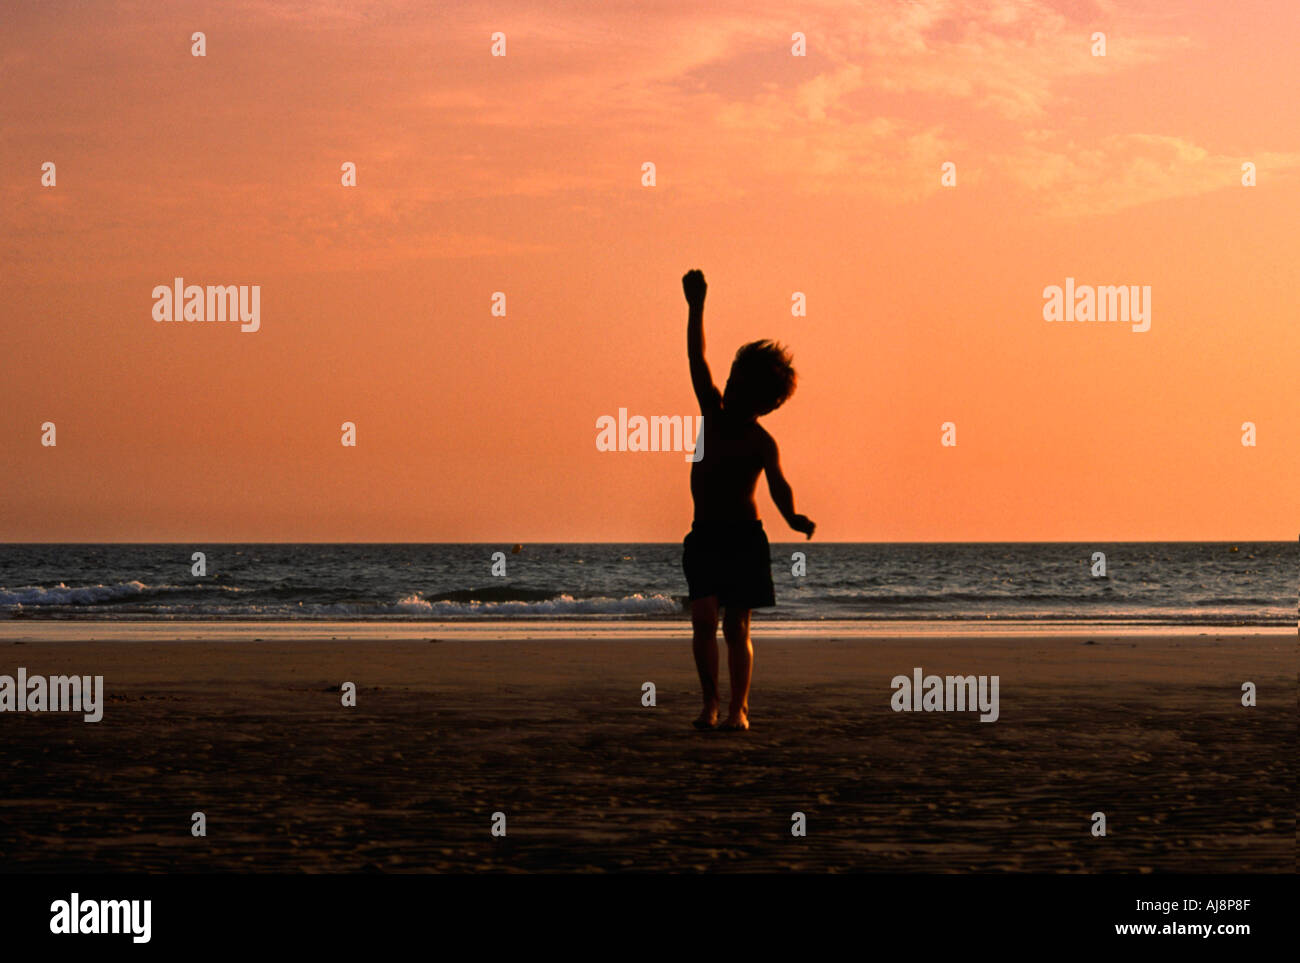 silhouette of young boy stretching up in the air while playing on the beach at sunset Stock Photo